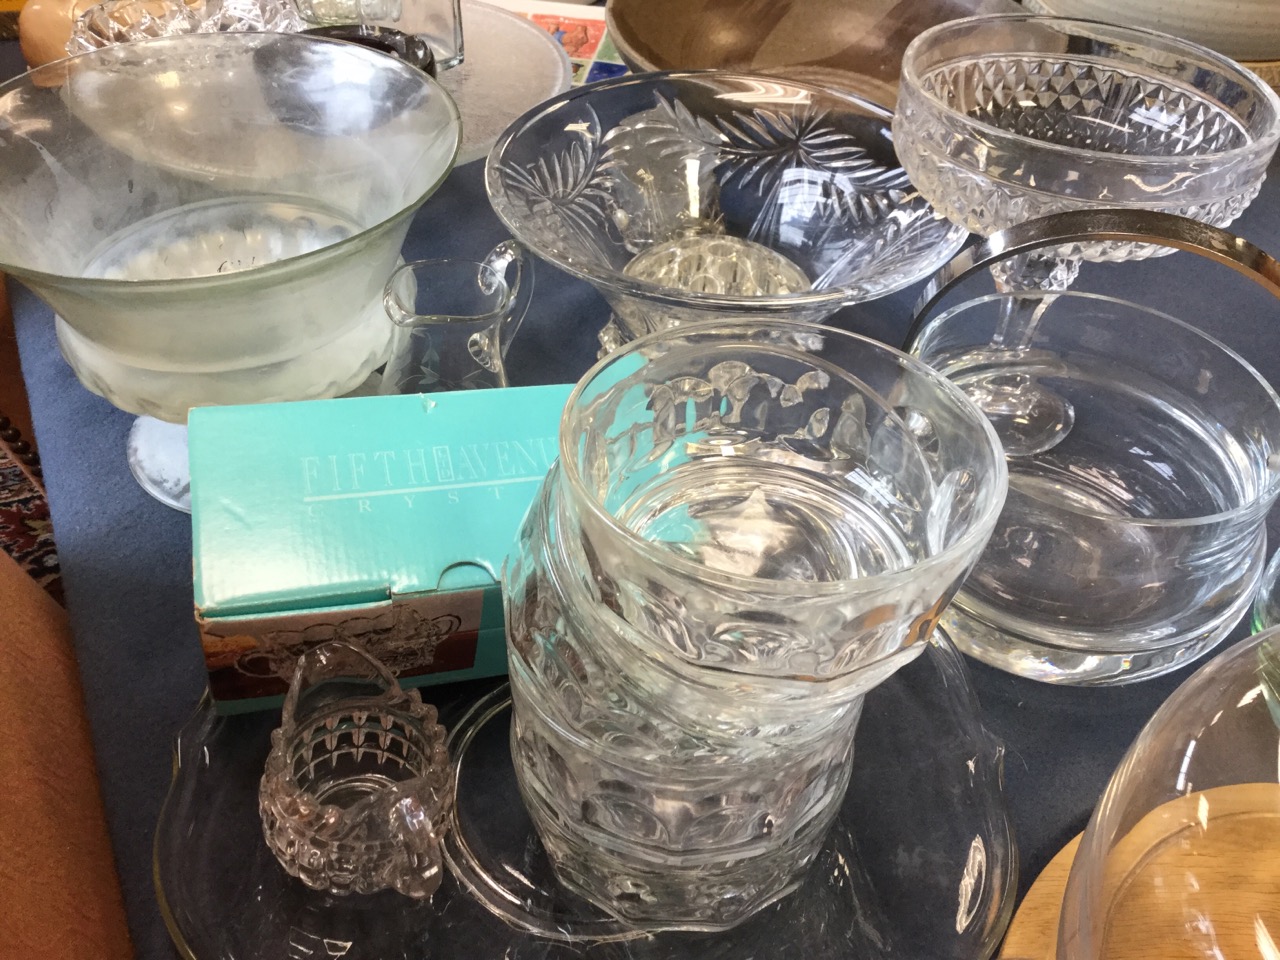 Miscellaneous glass including fruit bowls, platters, a ruby ashtray, bowls, vases, a dessert set, - Image 2 of 3